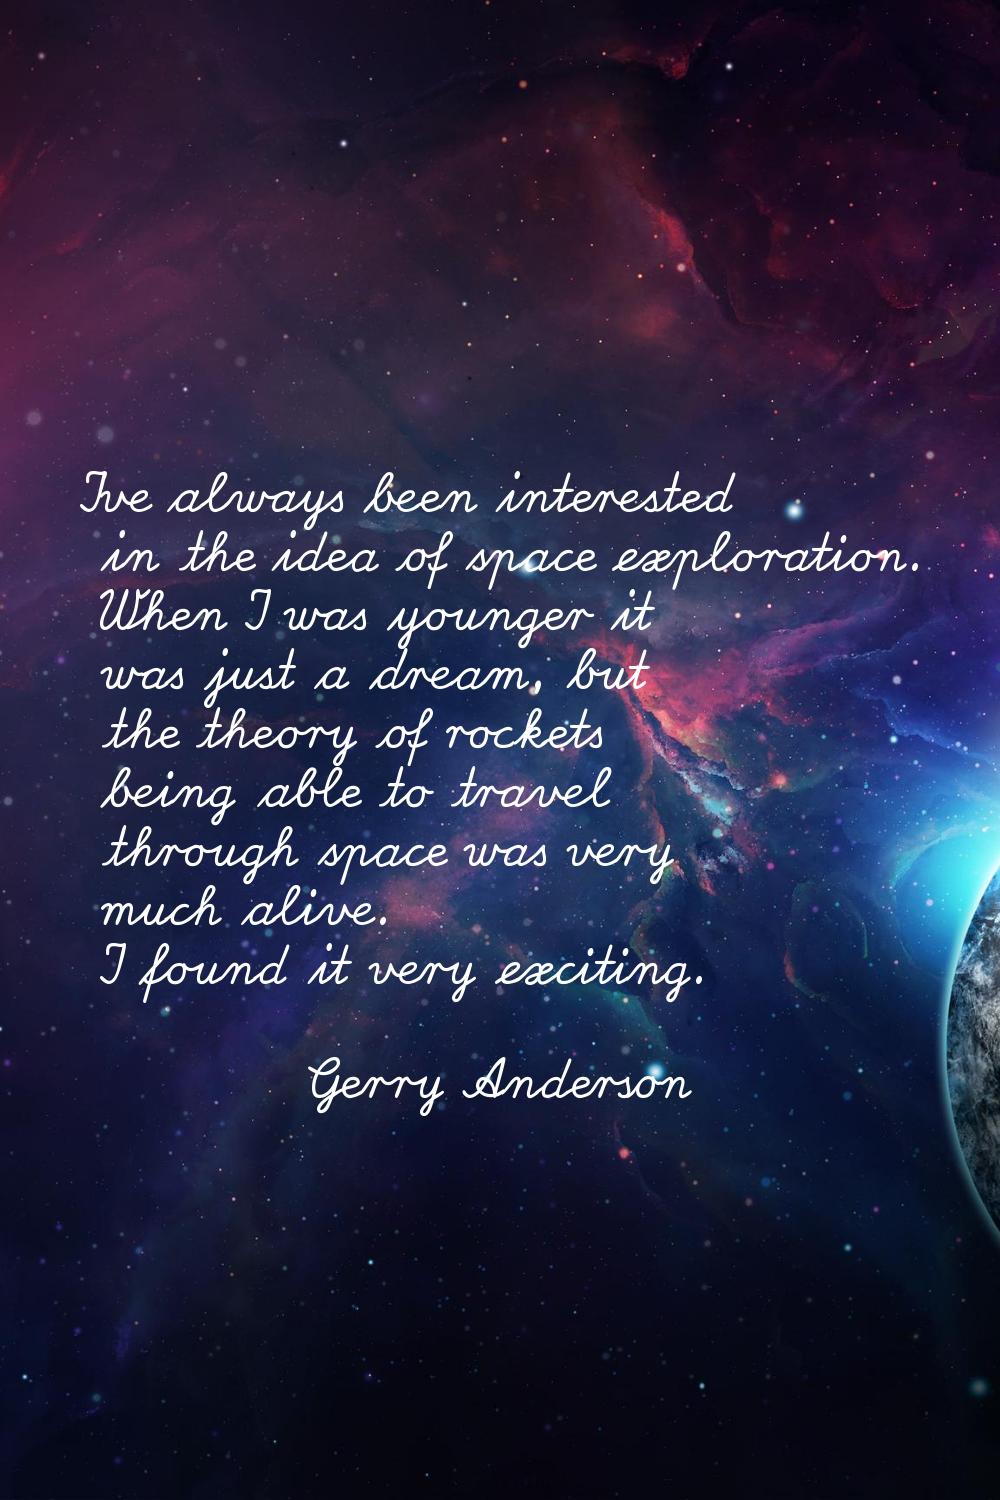 I've always been interested in the idea of space exploration. When I was younger it was just a drea